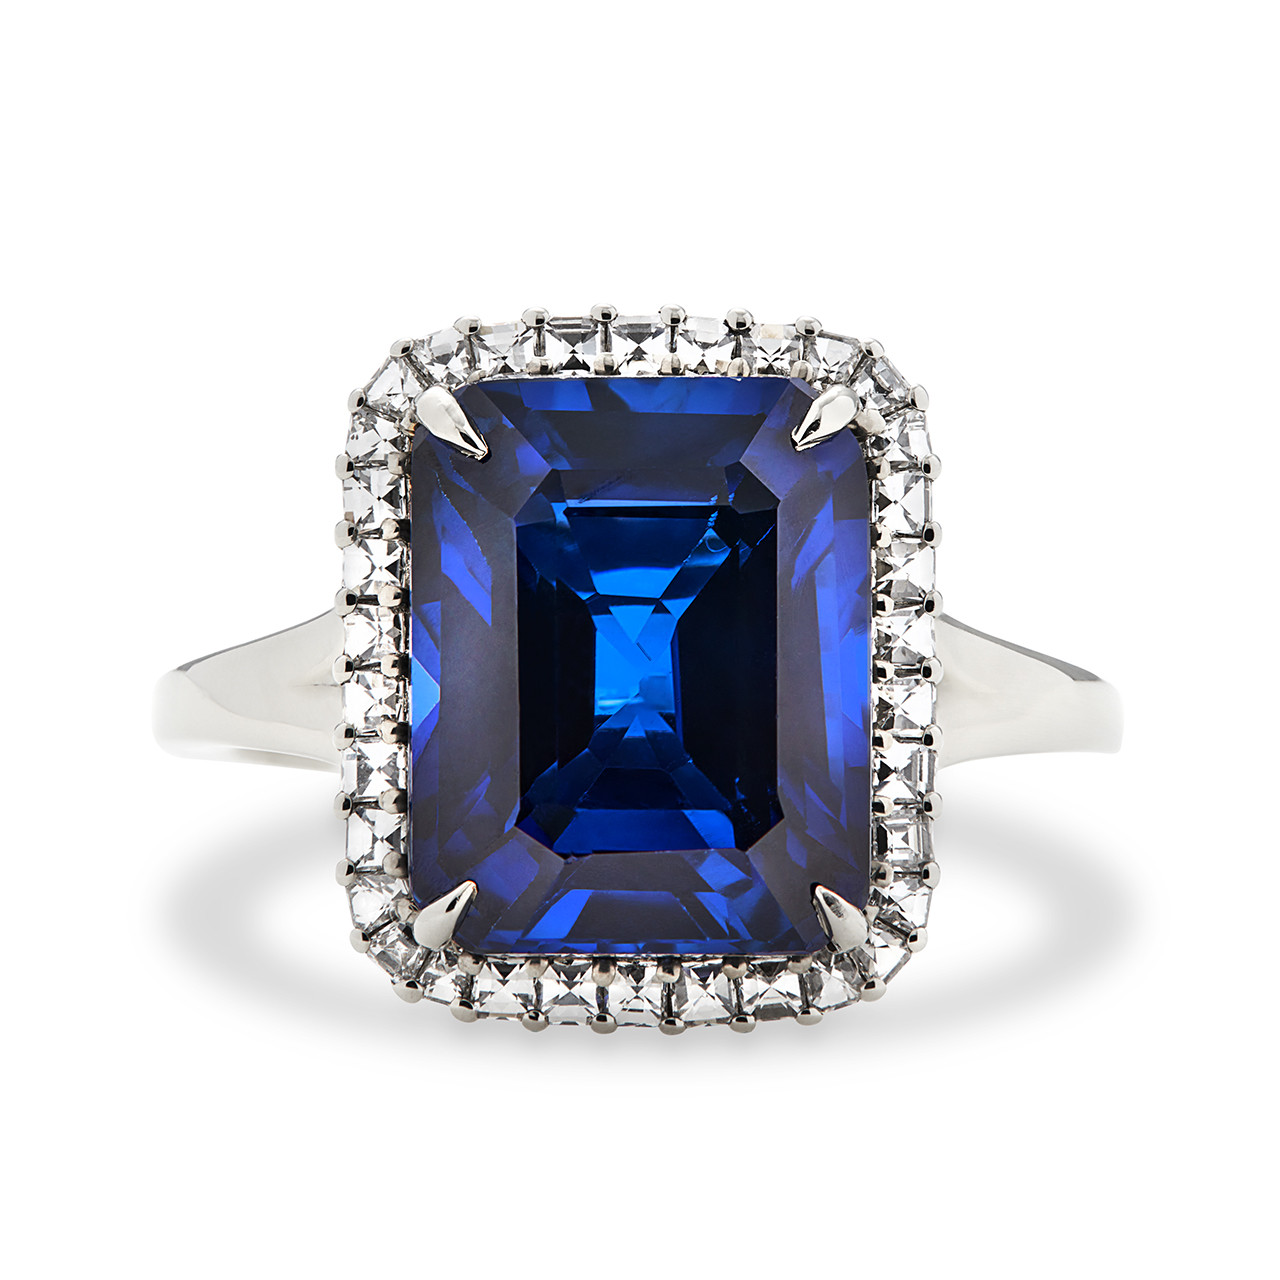 Neomodern 14K White Gold 1.5 CT Princess Blue Sapphire Engagement Ring  R389-14KWGBS | Caravaggio Jewelry